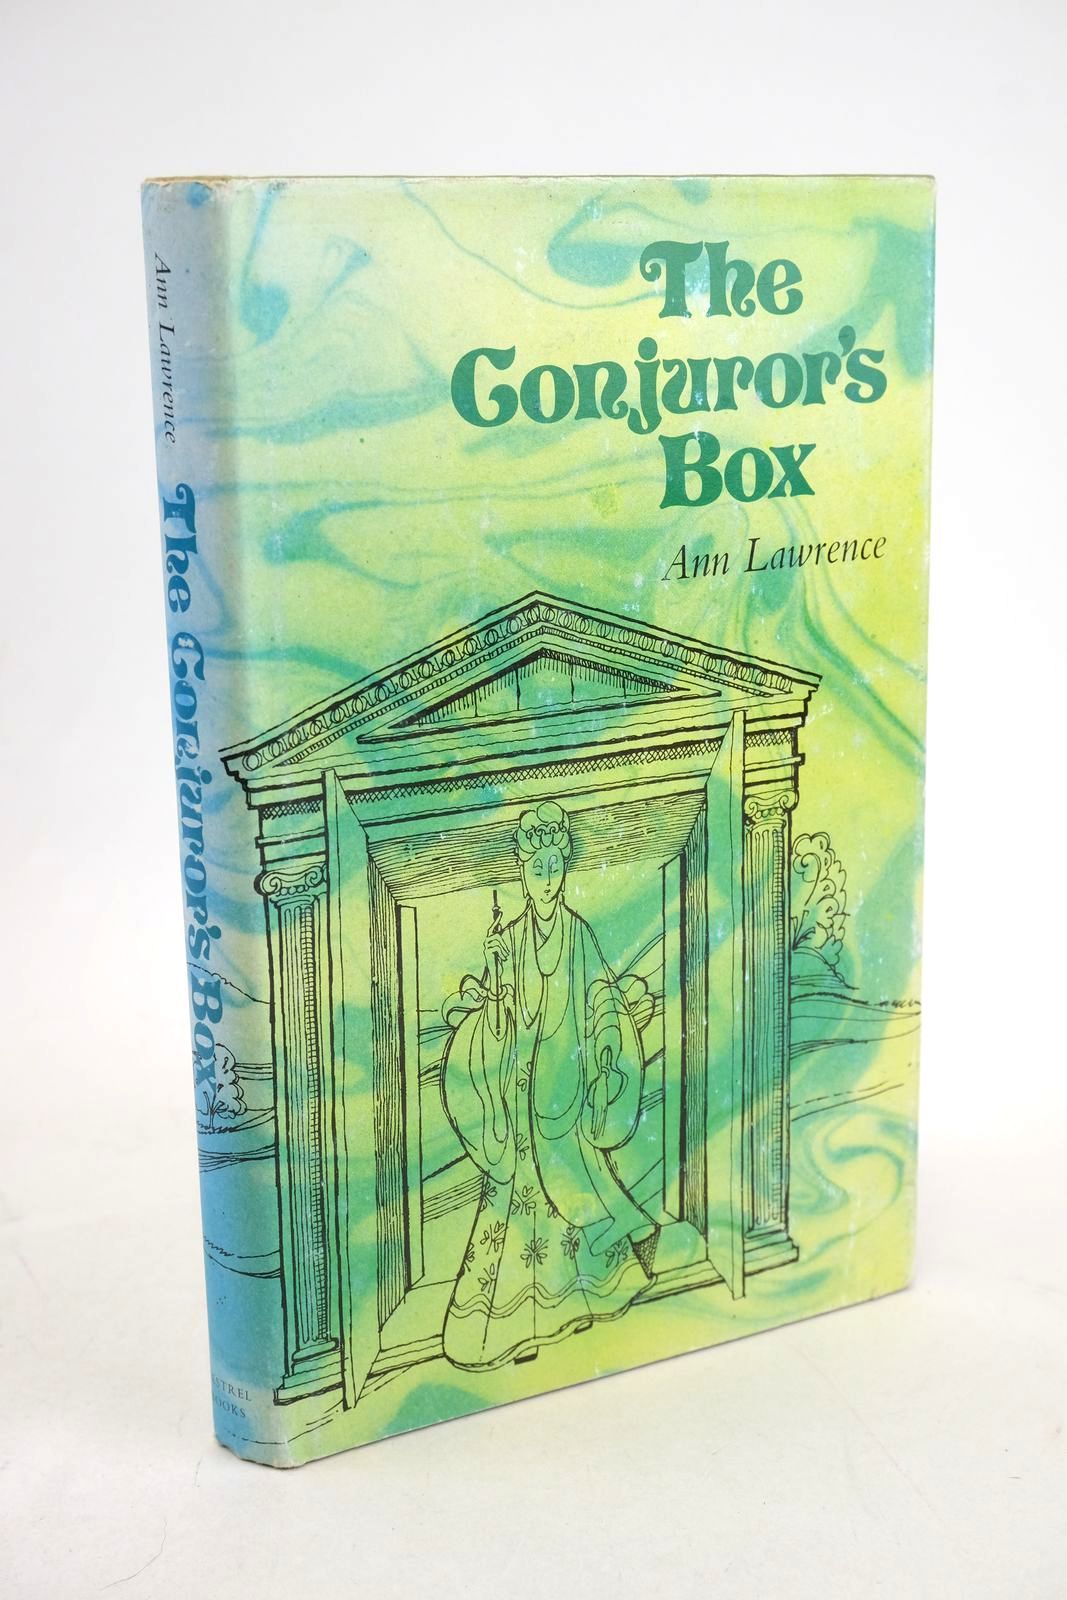 Photo of THE CONJUROR'S BOX written by Lawrence, Ann illustrated by Alldridge, Brian published by Kestrel Books (STOCK CODE: 1327469)  for sale by Stella & Rose's Books